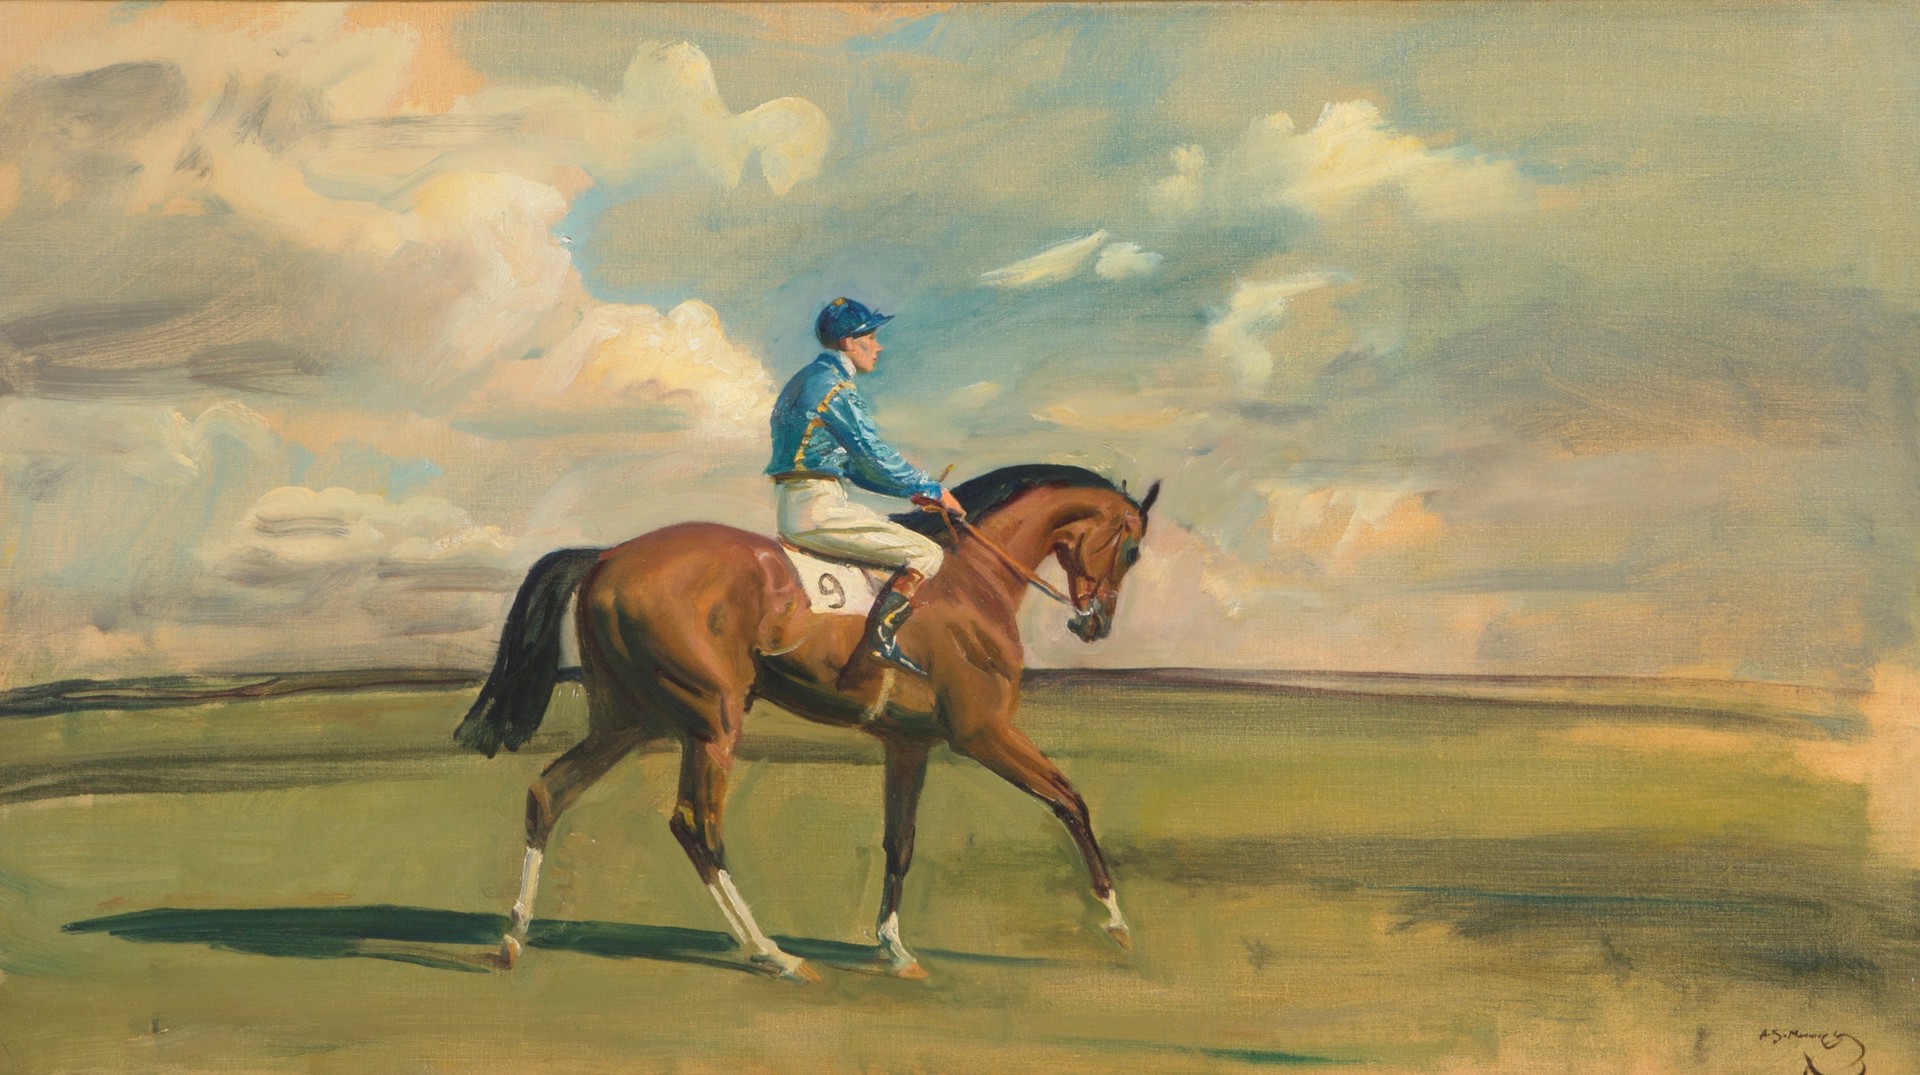 Bunker II, with Manny Mercer up in the Colors of Sir Adrian Jarvis, Bt. by Sir Alfred James Munnings